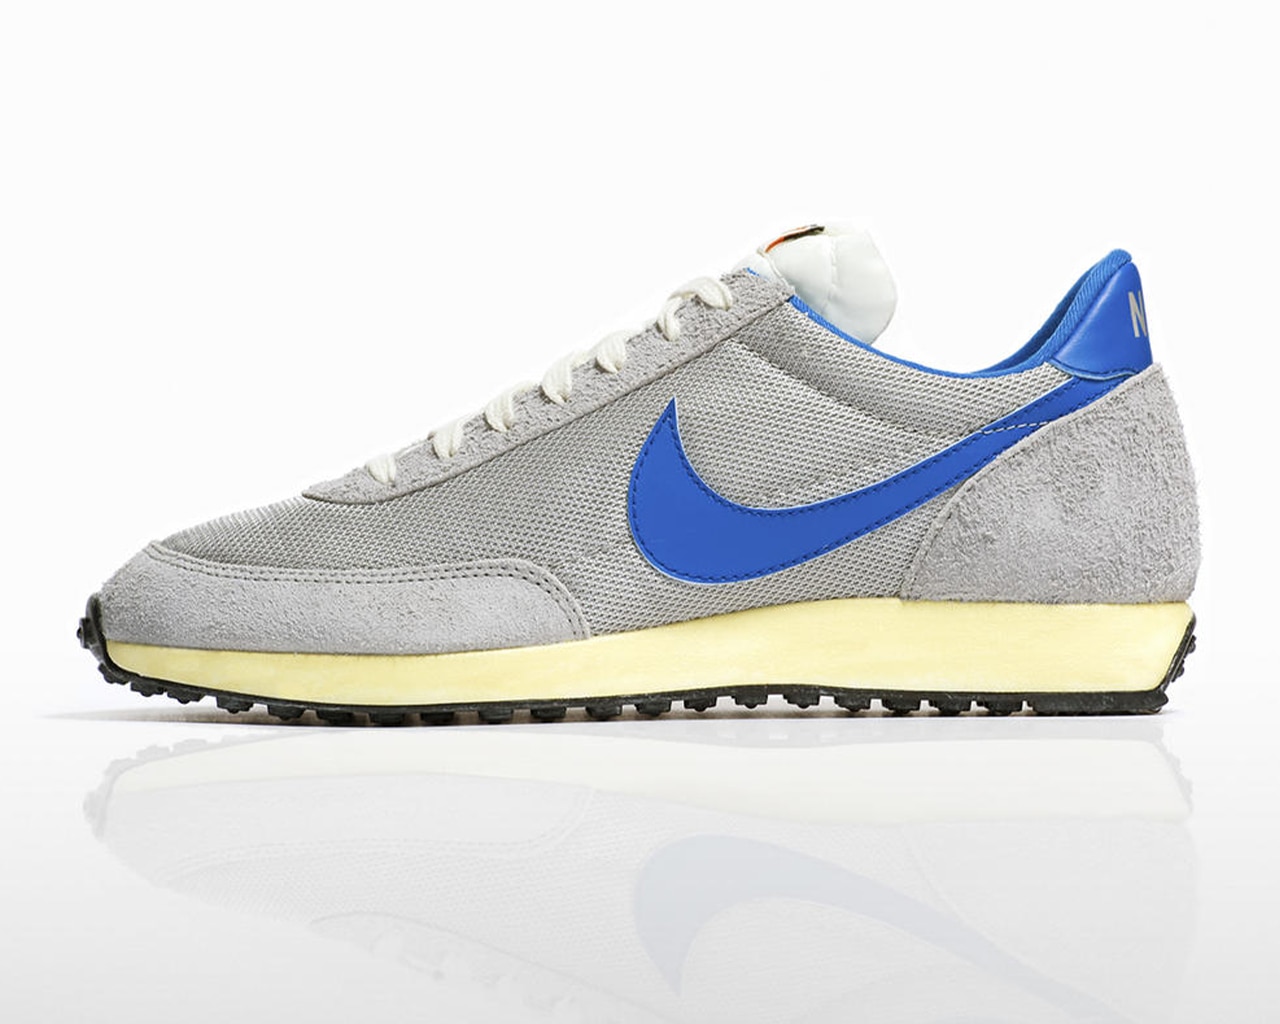 Walking On How Nike's Tailwind 79 Sneaker Sparked A Revolution | The Journal | MR PORTER